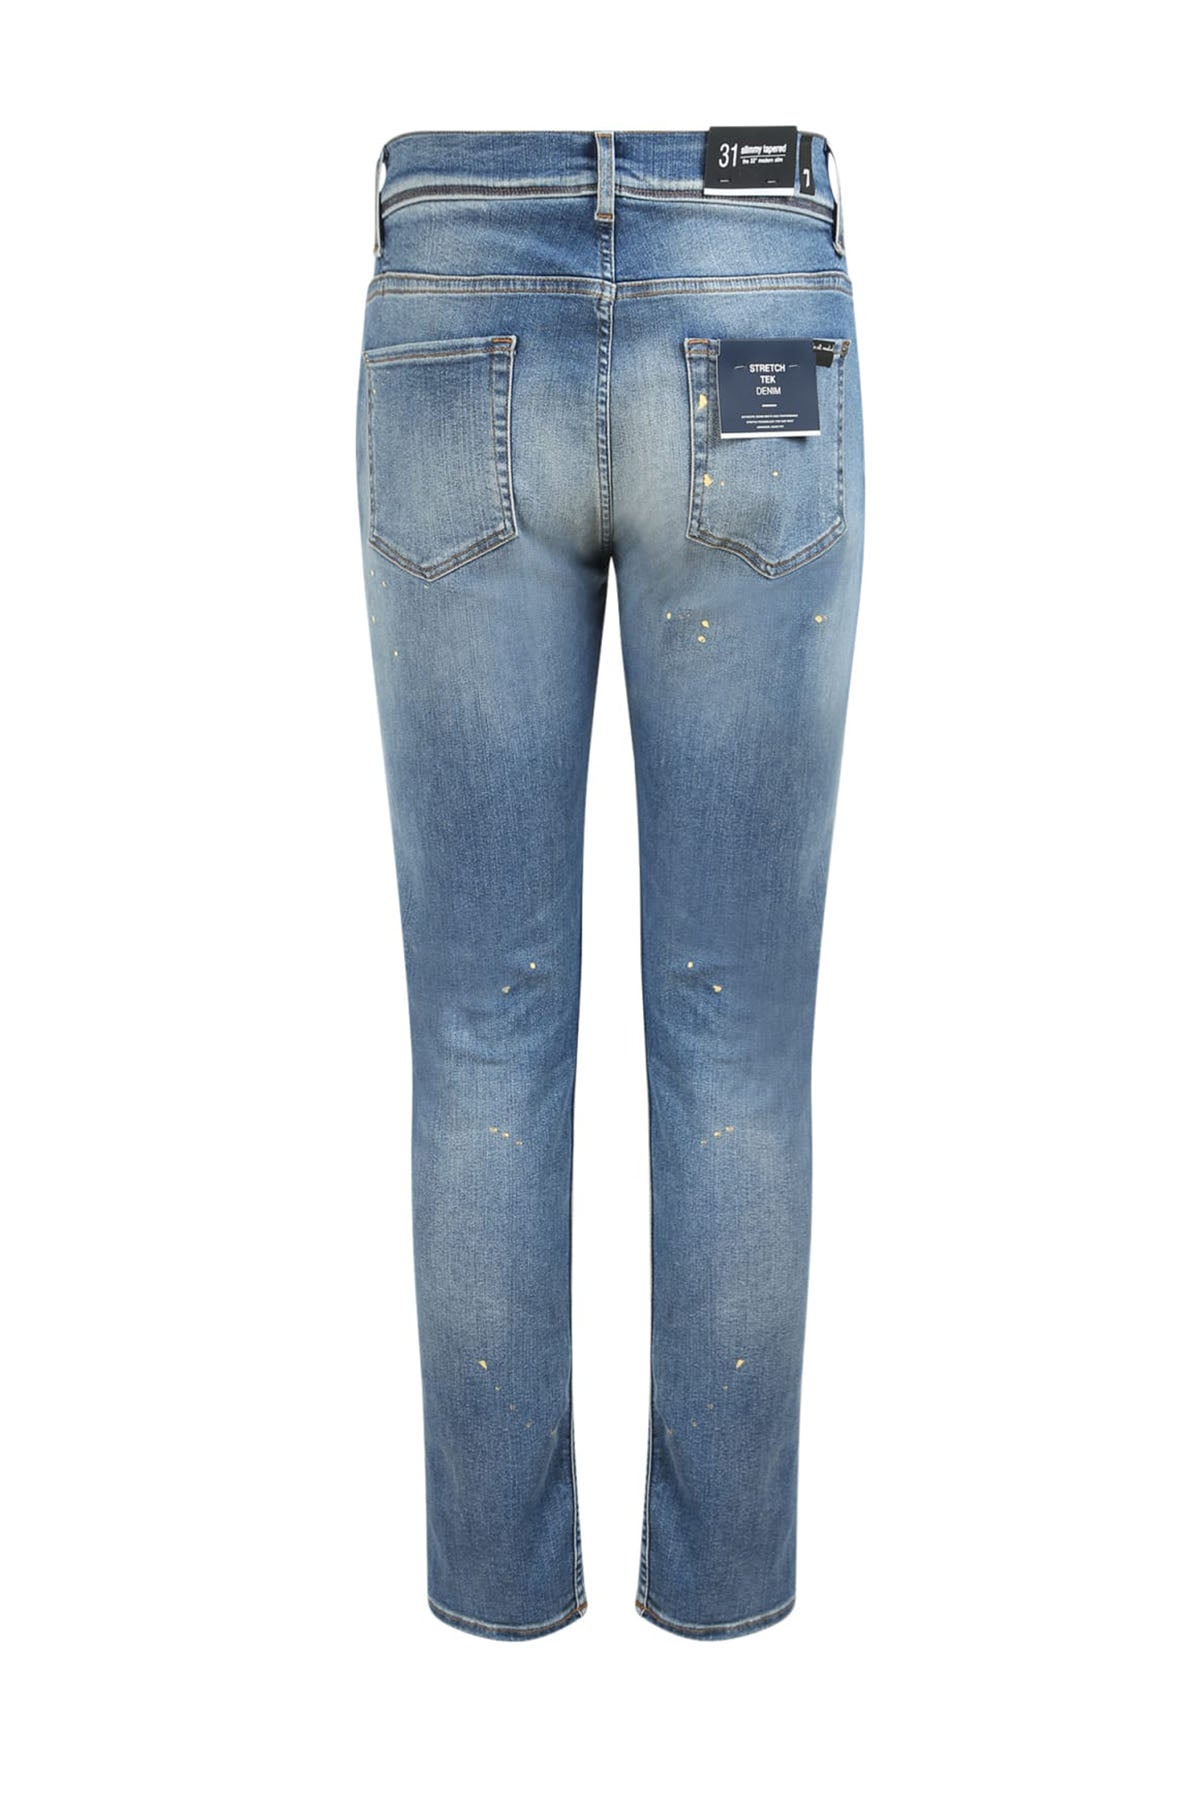 7 For All Mankind Slimmy Tapered Slim Fit Streç Jeans-Libas Trendy Fashion Store